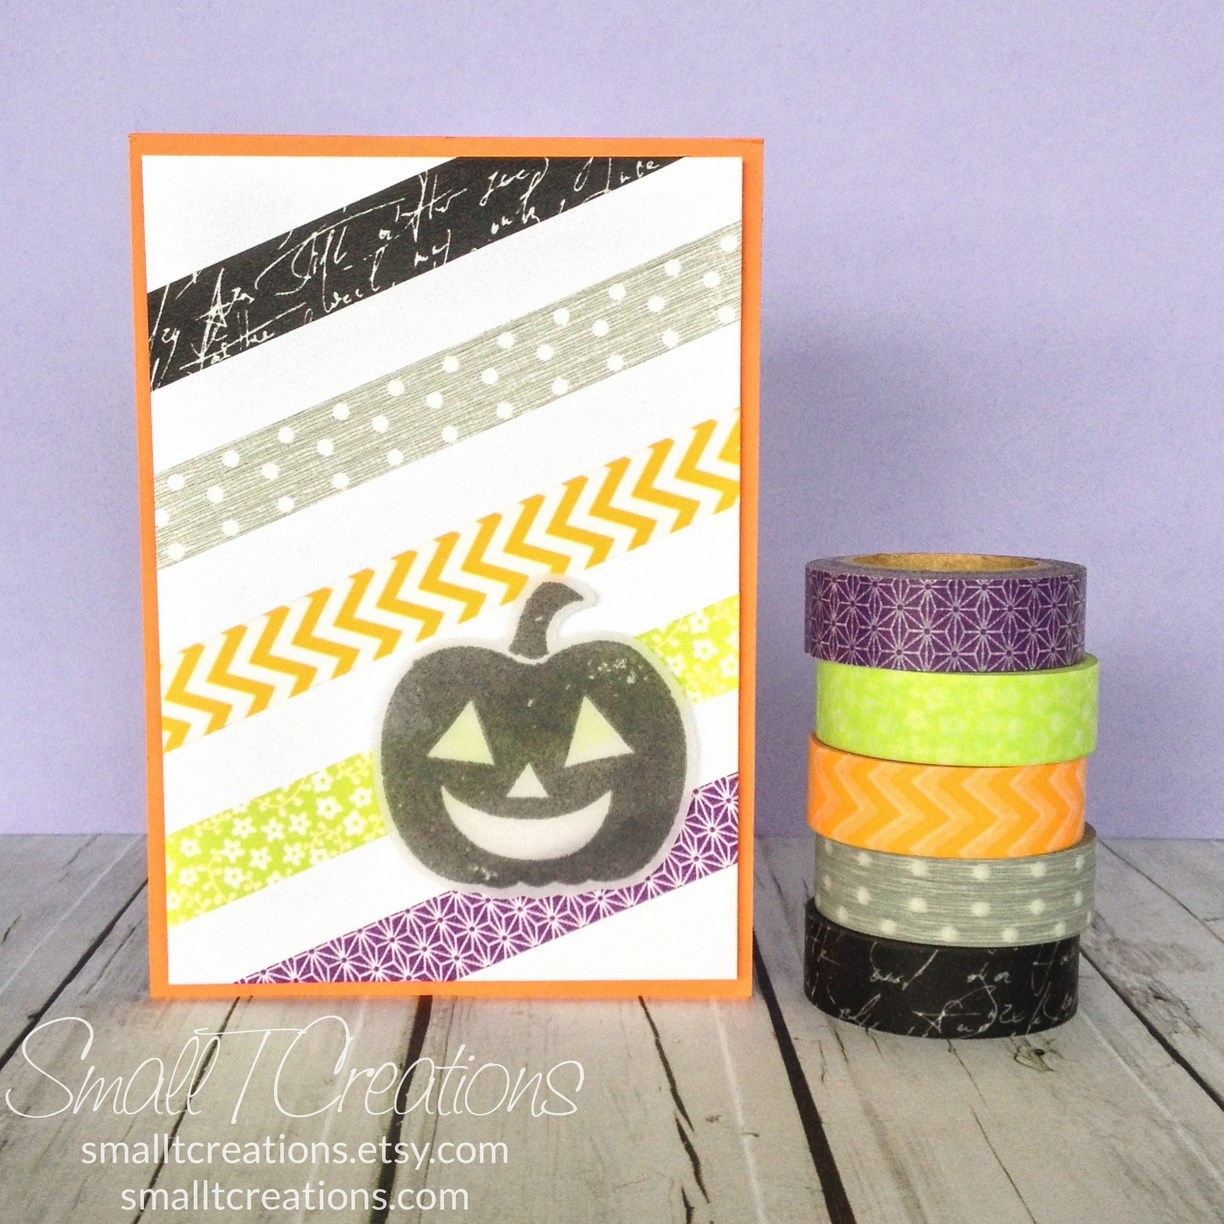 Halloween Washi Tape Card | Small T Creations. Get the washi tapes here: https://smalltcreations.etsy.com/